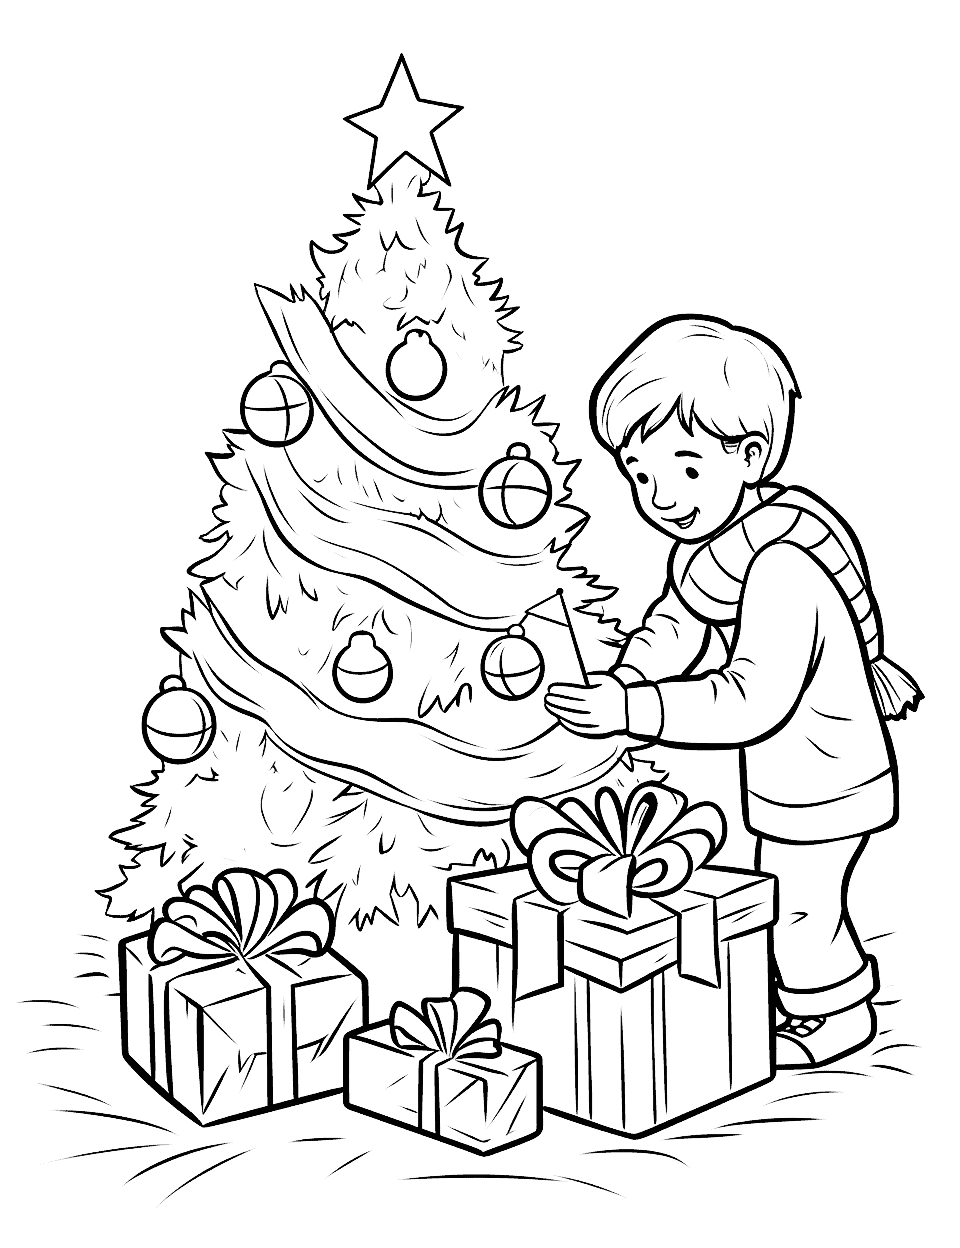 The Magic of Christmas Coloring Page - Kids waking up to find presents under the tree, capturing the magic of Christmas morning.